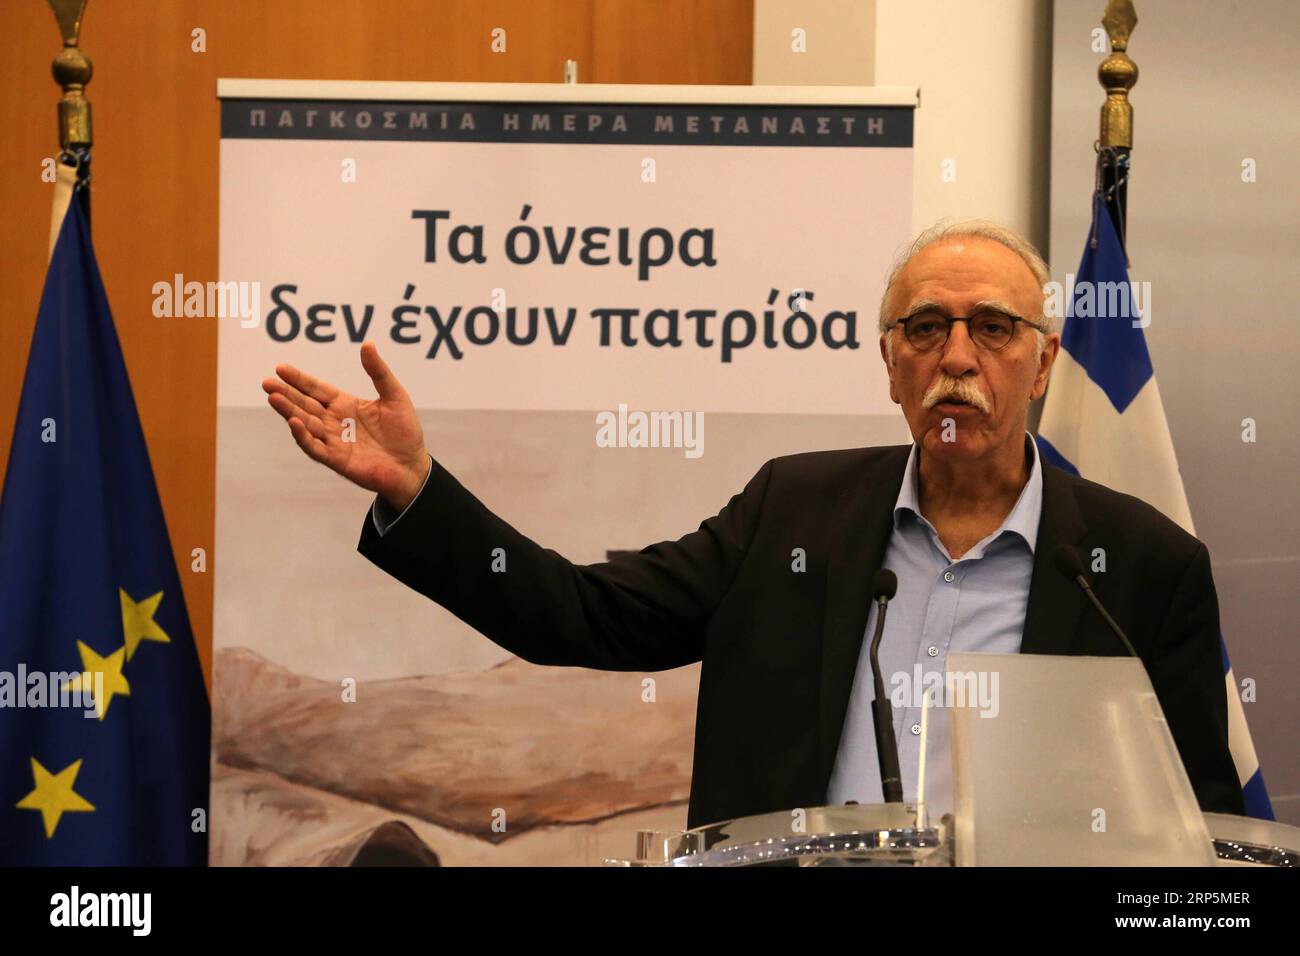 (181219) -- ATHENS, Dec. 19, 2018 -- Greek Minister for Migration Policy Dimitrios Vitsas speaks at a press conference on the occasion of the International Migrants Day in Athens, Greece, on Dec. 18, 2018. Greek society has sent a clear message of solidarity to people seeking a better life away from their homelands, Greek officials told the press conference on Tuesday on the occasion of International Migrants Day, observed on Dec. 18 each year since 2000. During the eight years of the debt crisis, Greece has been working systematically towards the smooth integration of migrants in difficult ci Stock Photo